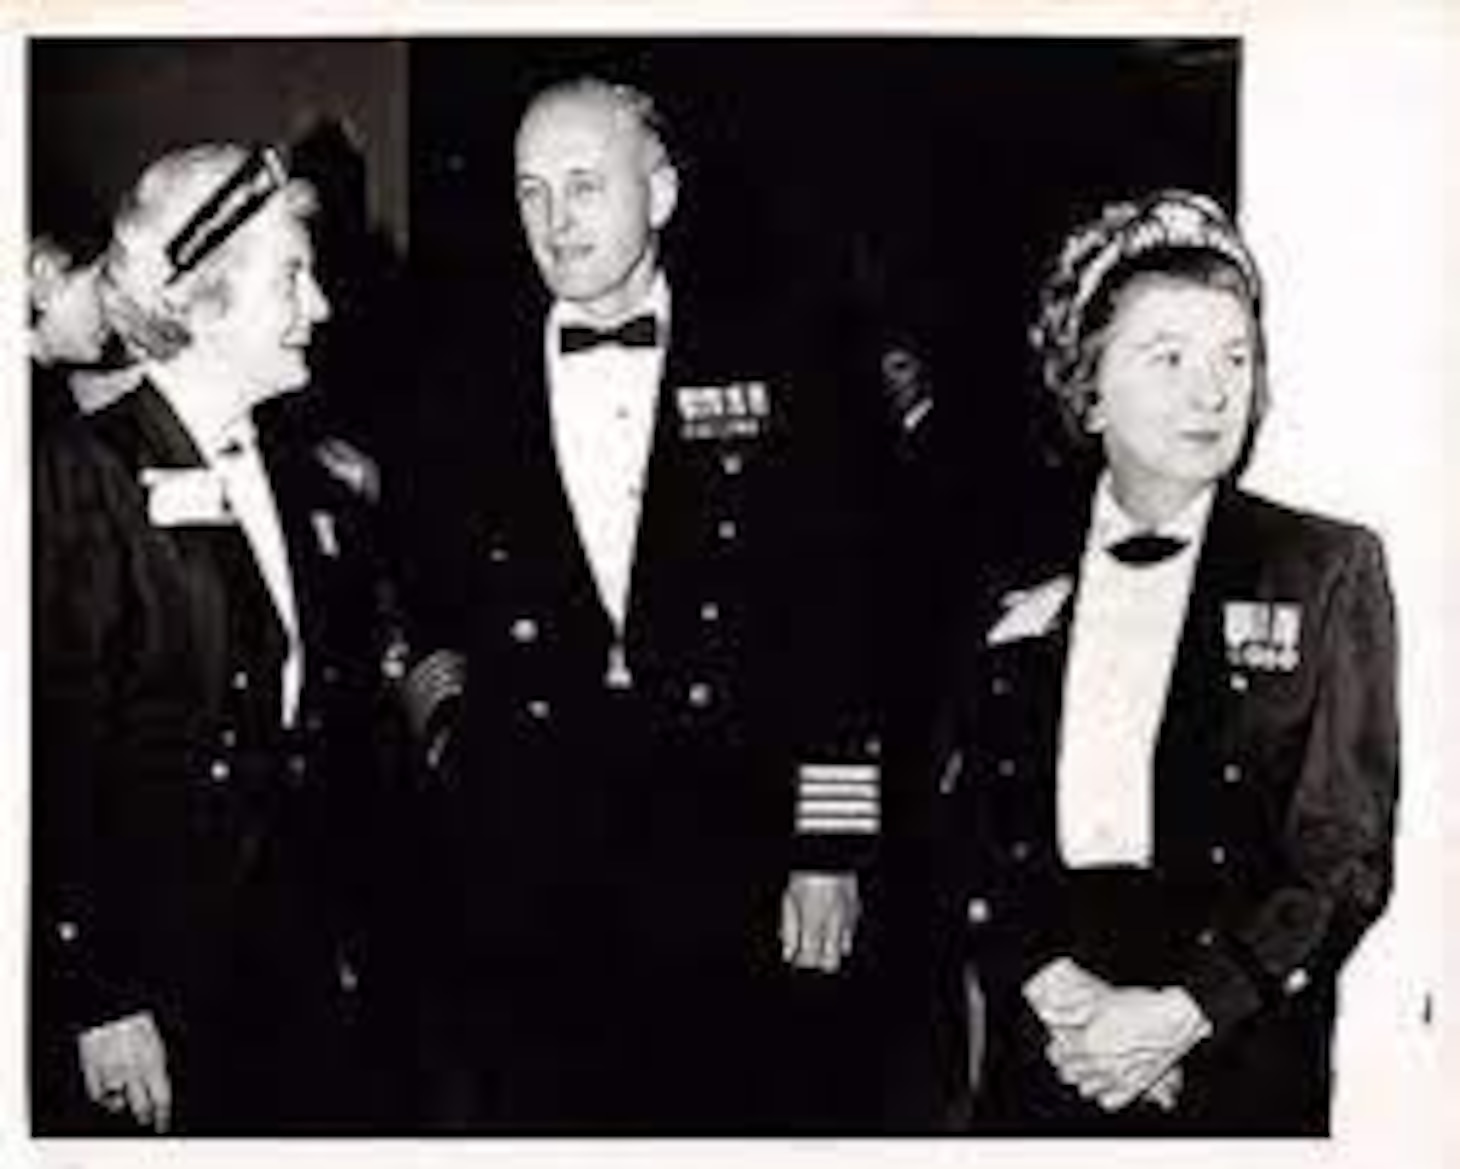 Black and white photo of sailors in uniform chatting, Alma Ellis on the right